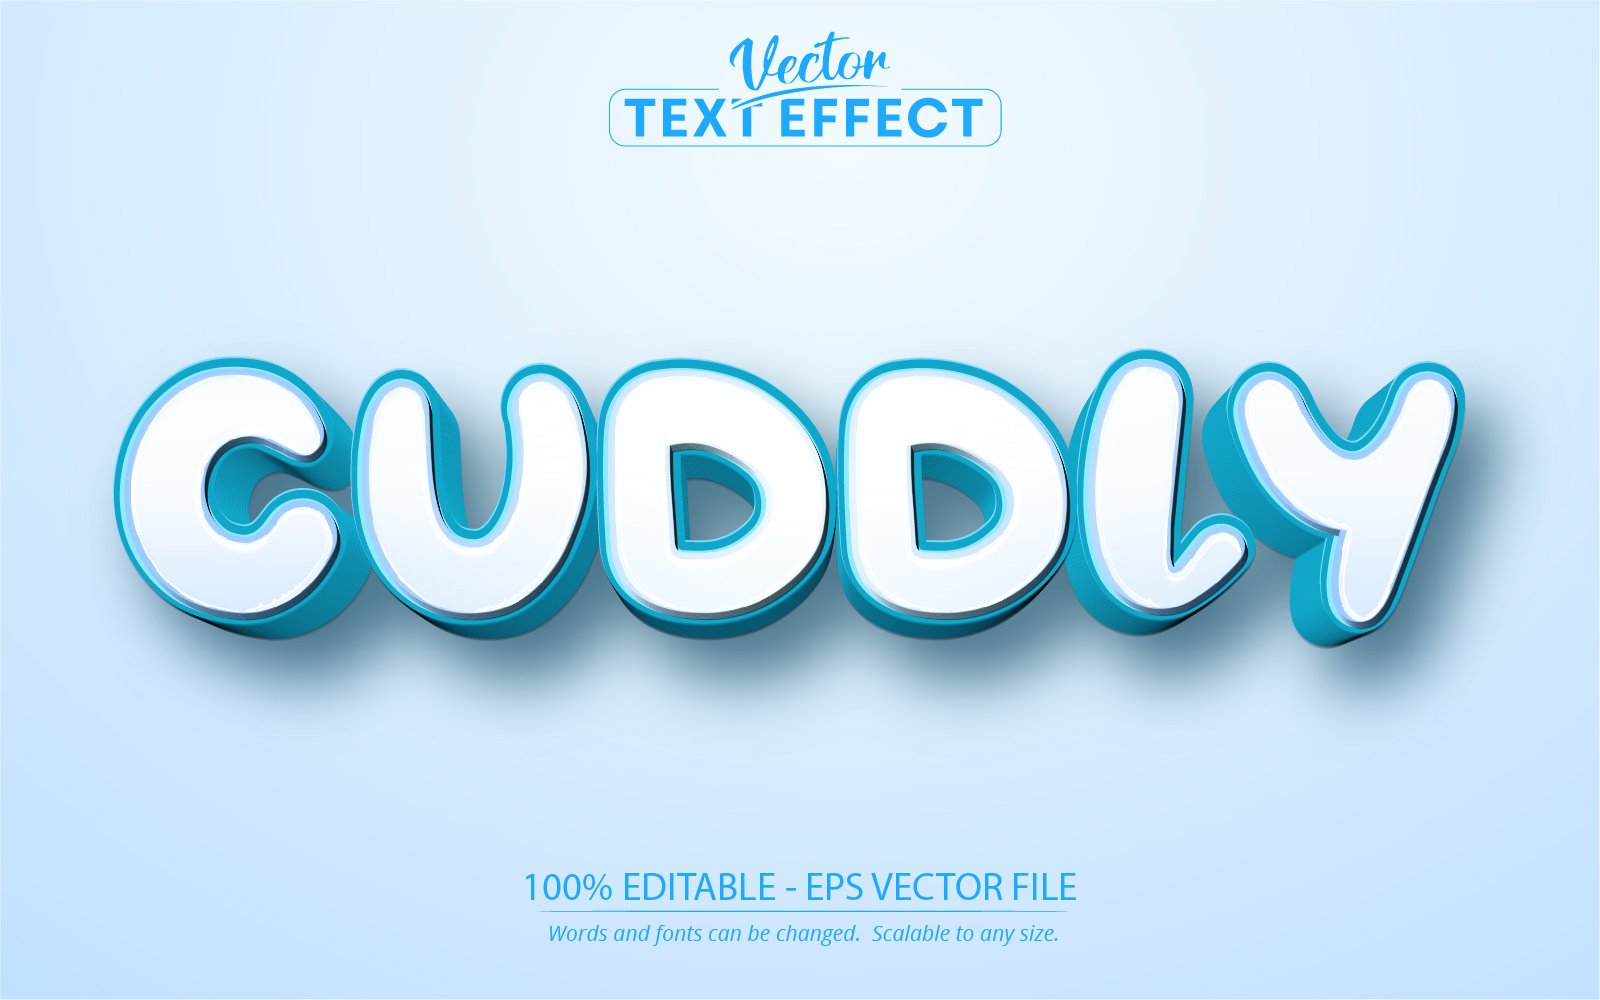 Cuddly - Editable Text Effect, Soft Blue Cartoon Text Style, Graphics Illustration